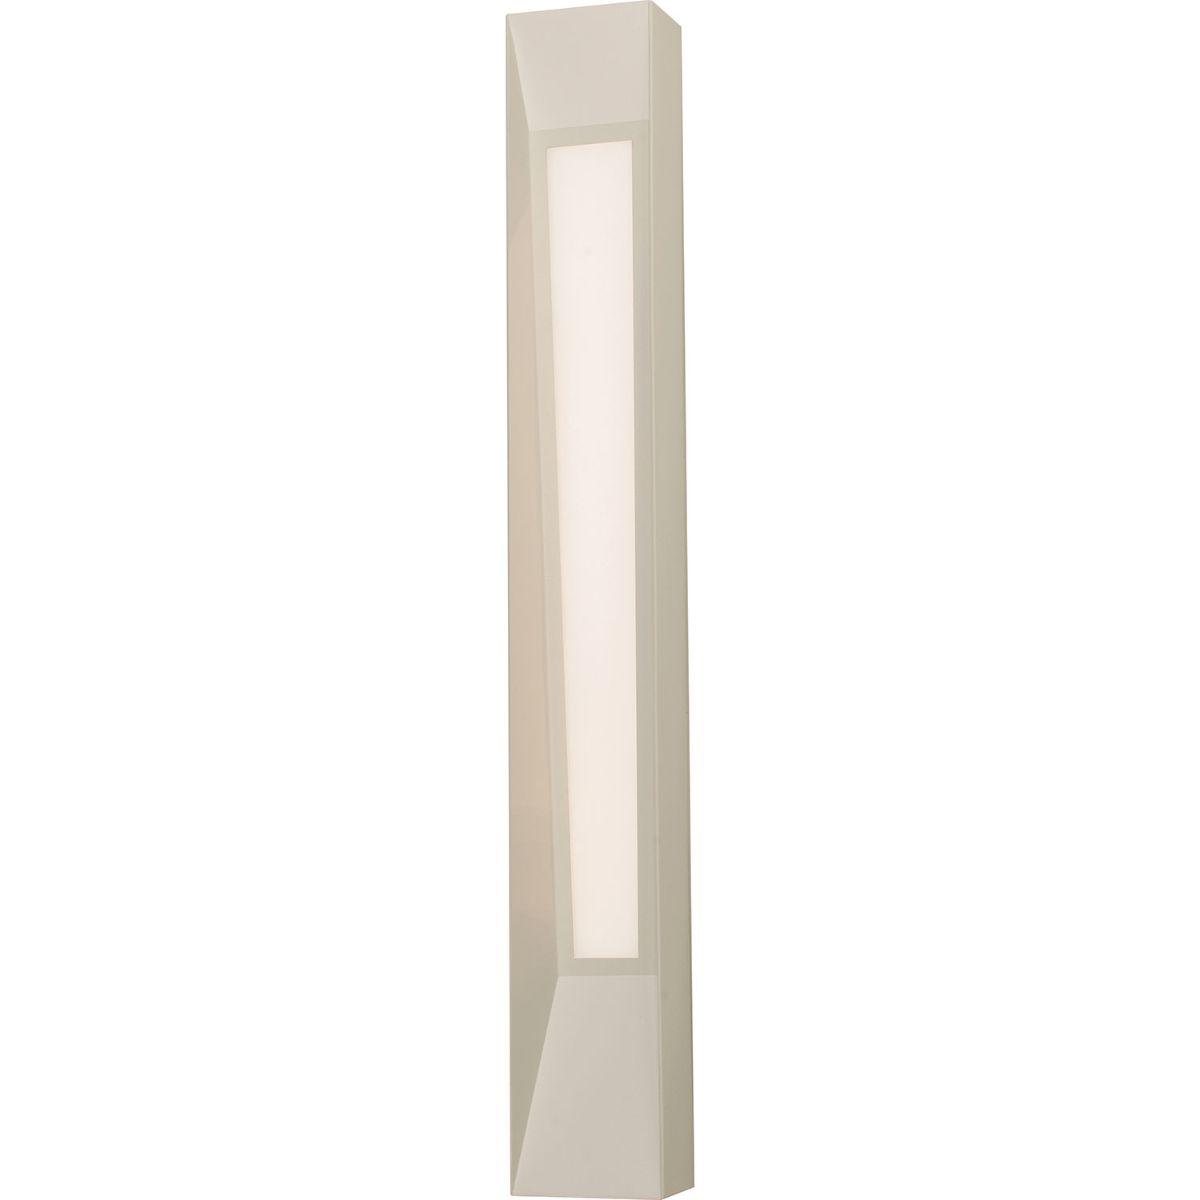 Rowan 30 in. LED Outdoor Wall Sconce